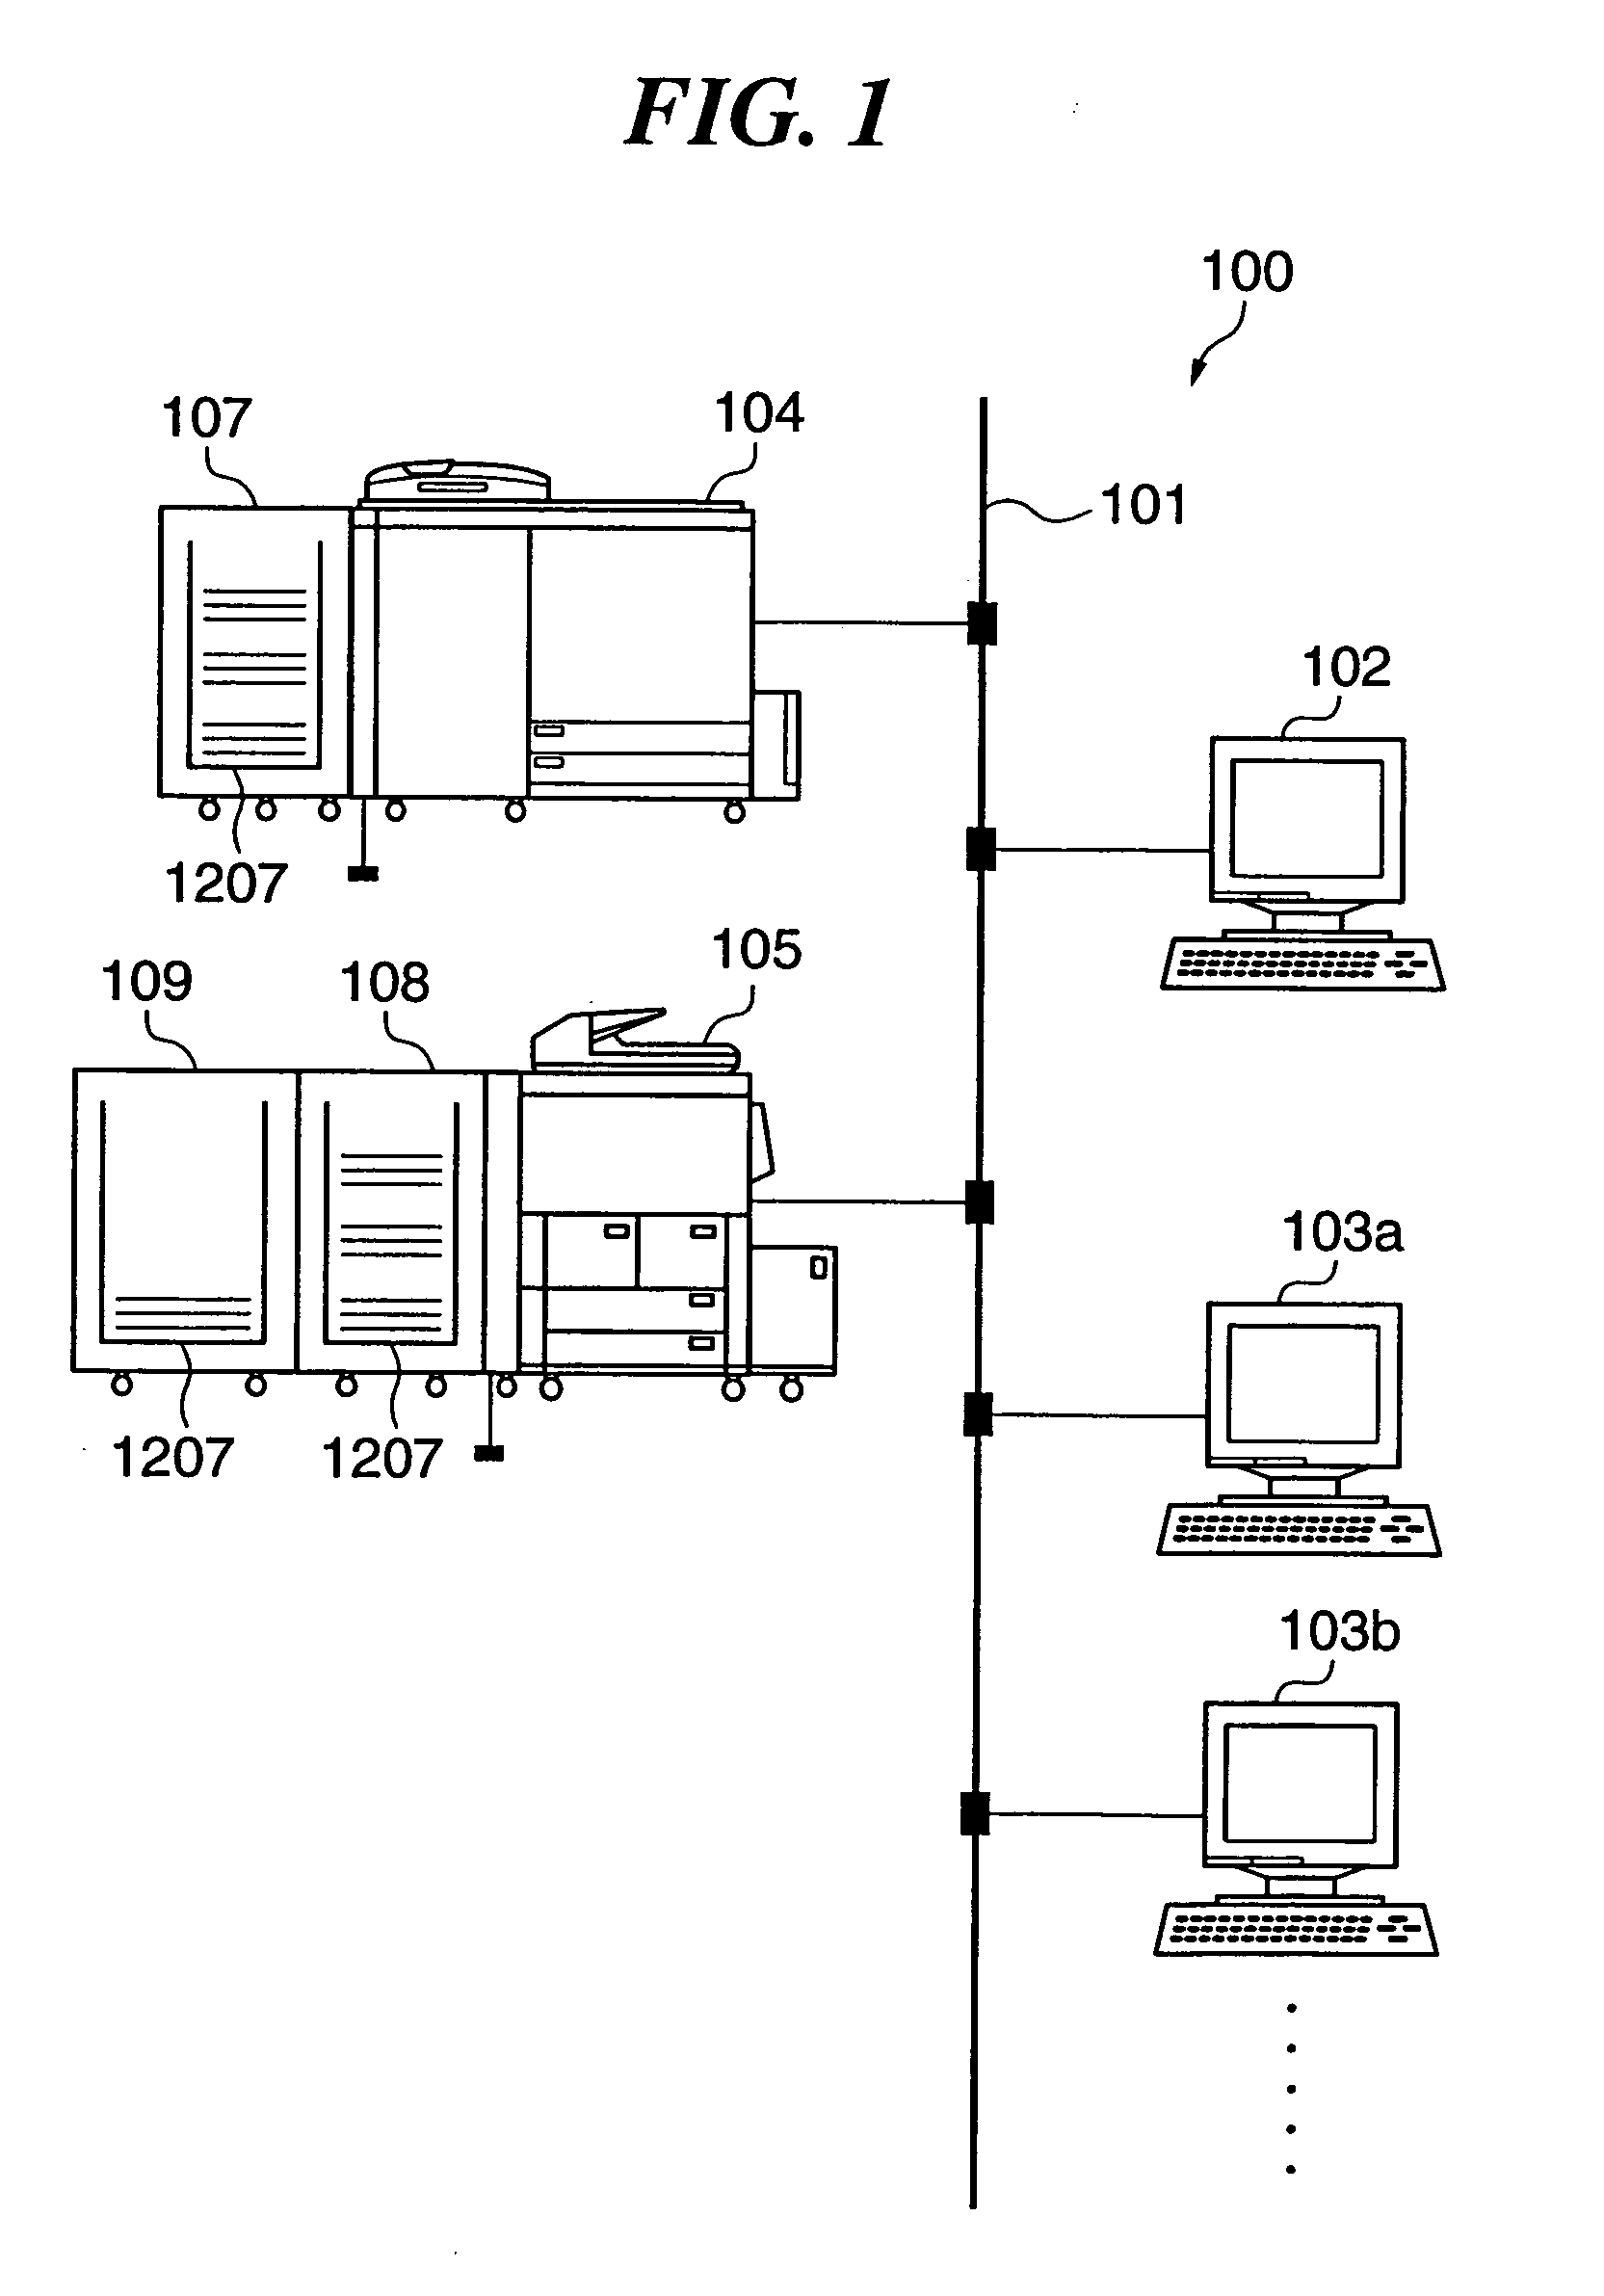 Image forming apparatus capable of executing image forming jobs having priority levels